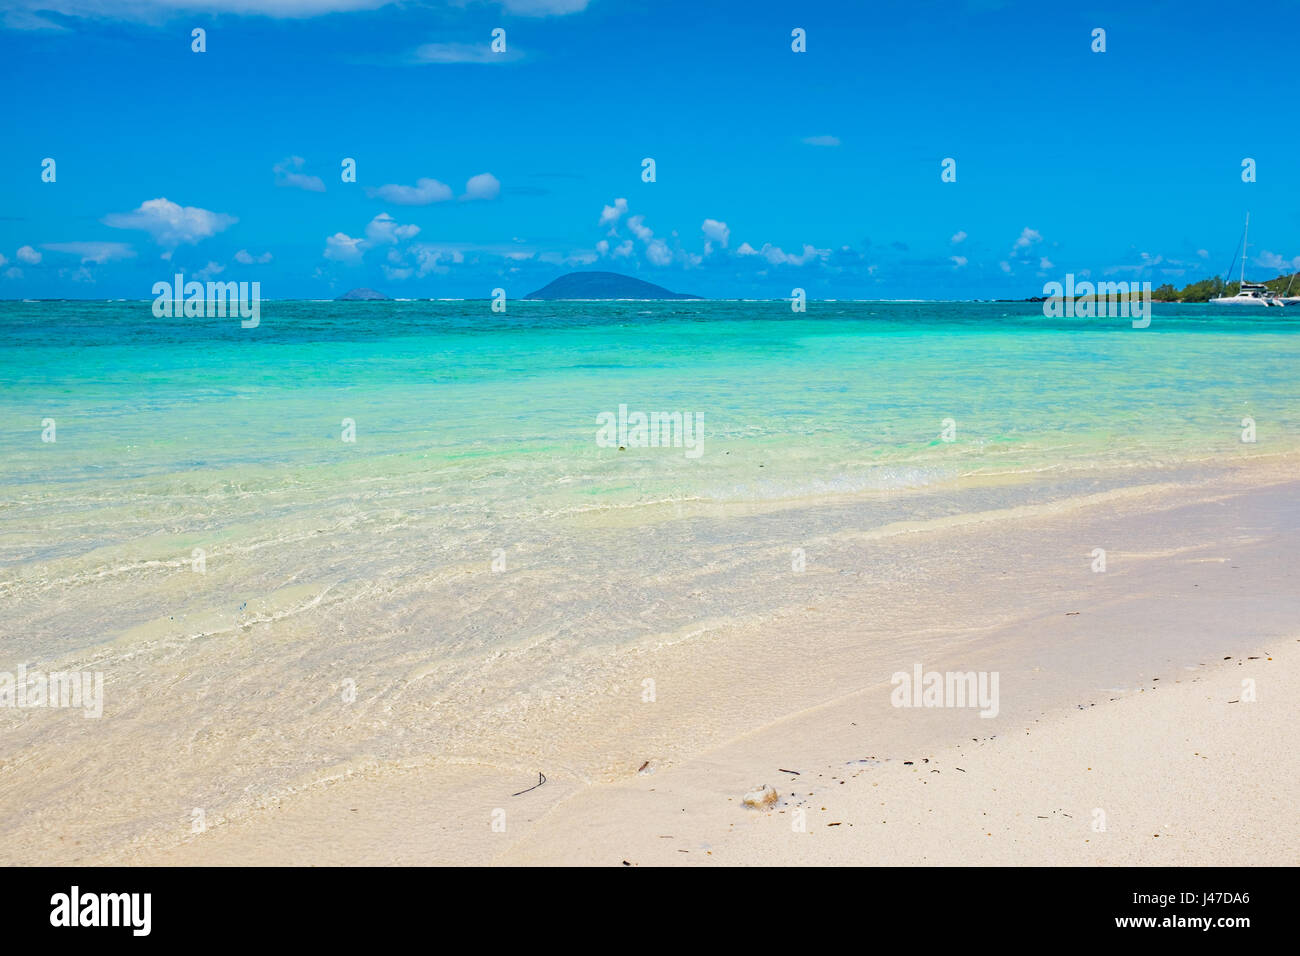 Beach on the tropical island. Clear blue water, sand and palm trees. Beautiful vacation spot, treatment and aquatics. Stock Photo